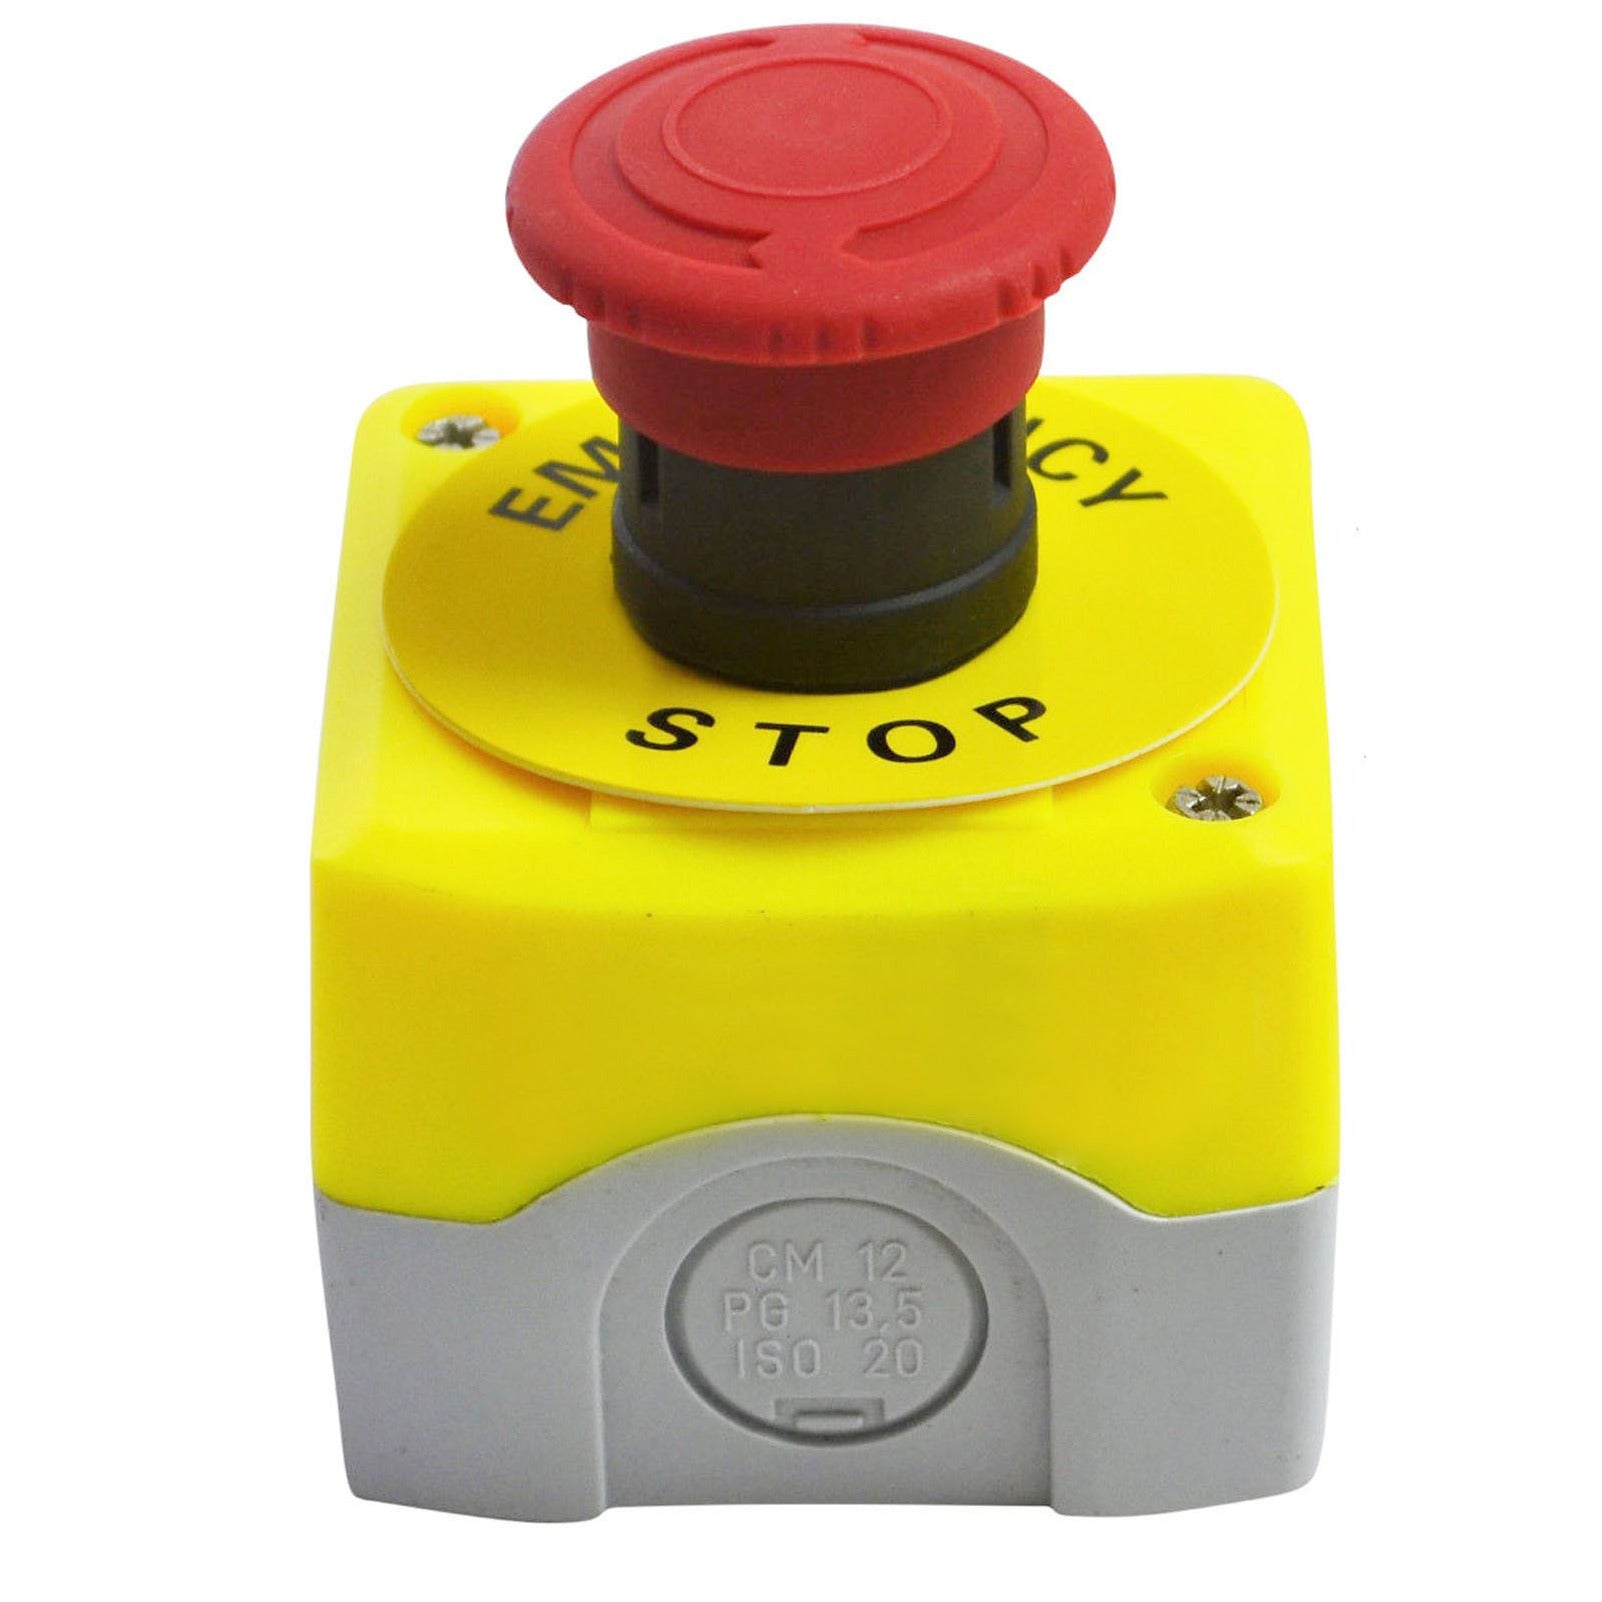 Emergency E Stop Switch Electrical 12V-24V Telemecanique Best Disconnect Switch